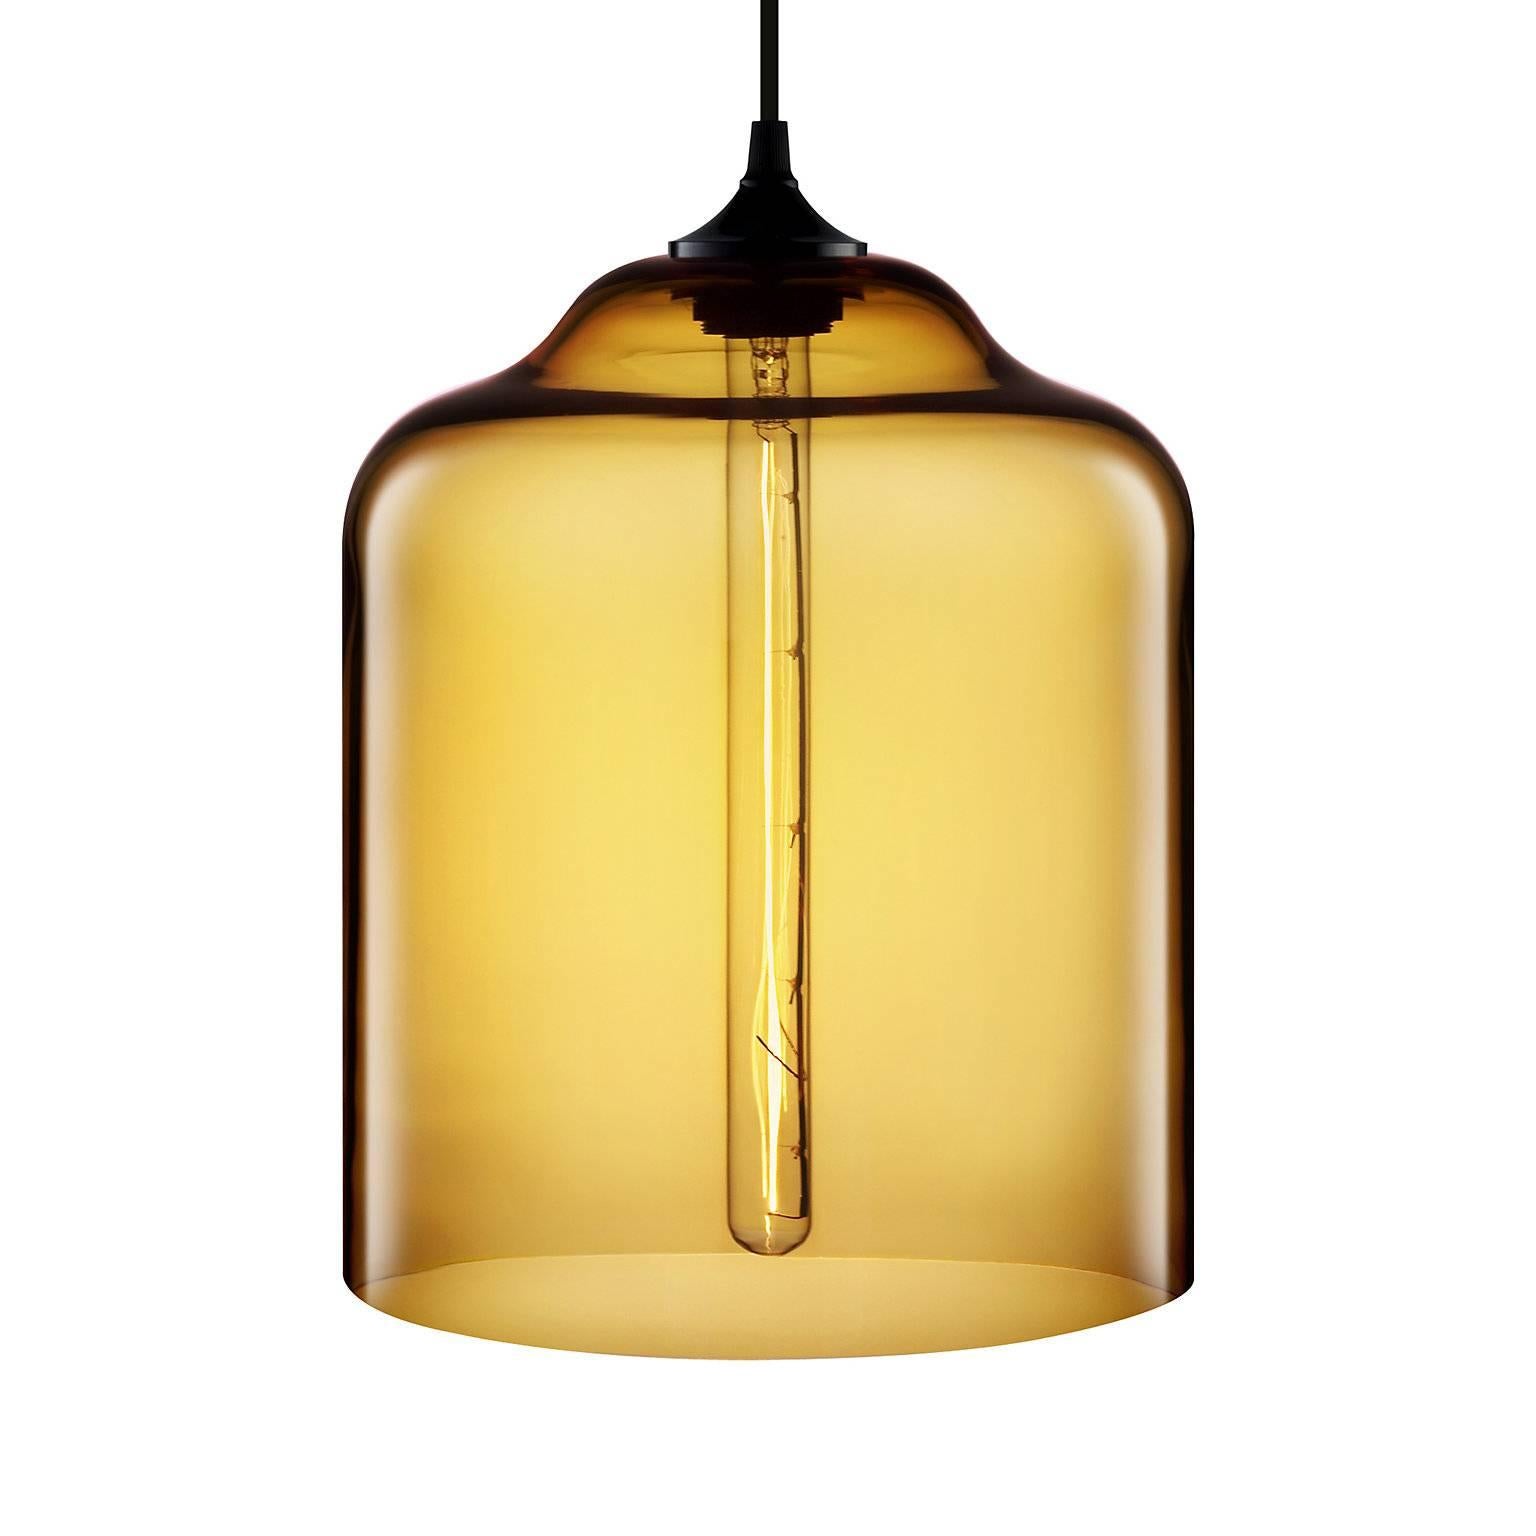 Celebrating iconic design, the Bell jar and its sleeker companion, the Bella, cast glorious beams of light that are as warm as they are welcoming. Every single glass pendant light that comes from Niche is handblown by real human beings in a